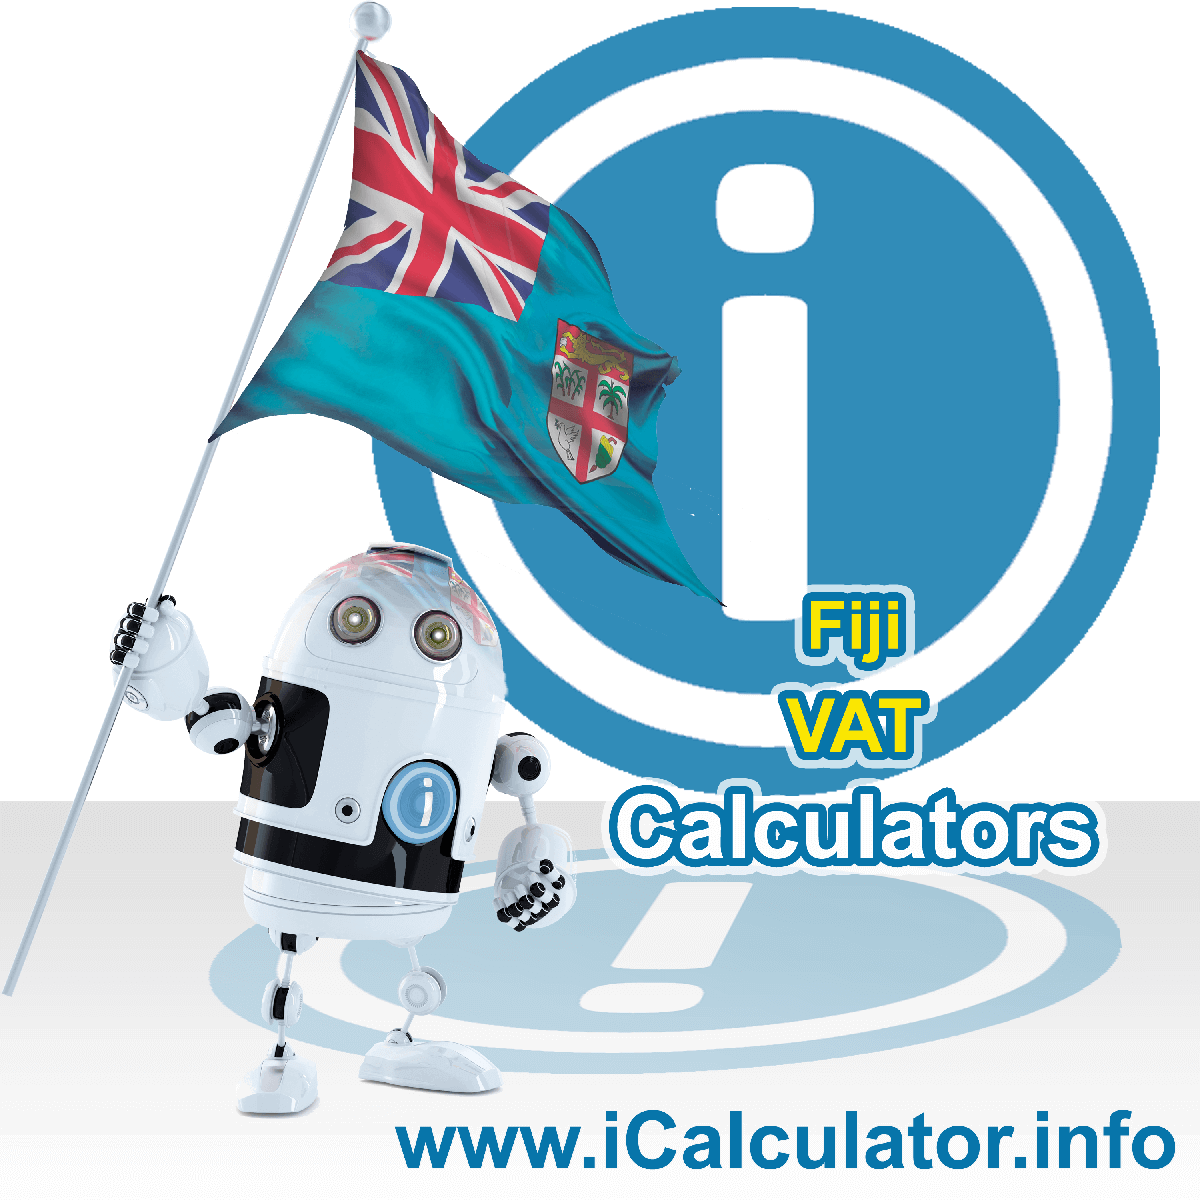 Fiji VAT Calculator. This image shows the Fiji flag and information relating to the VAT formula used for calculating Value Added Tax in Fiji using the Fiji VAT Calculator in 2023